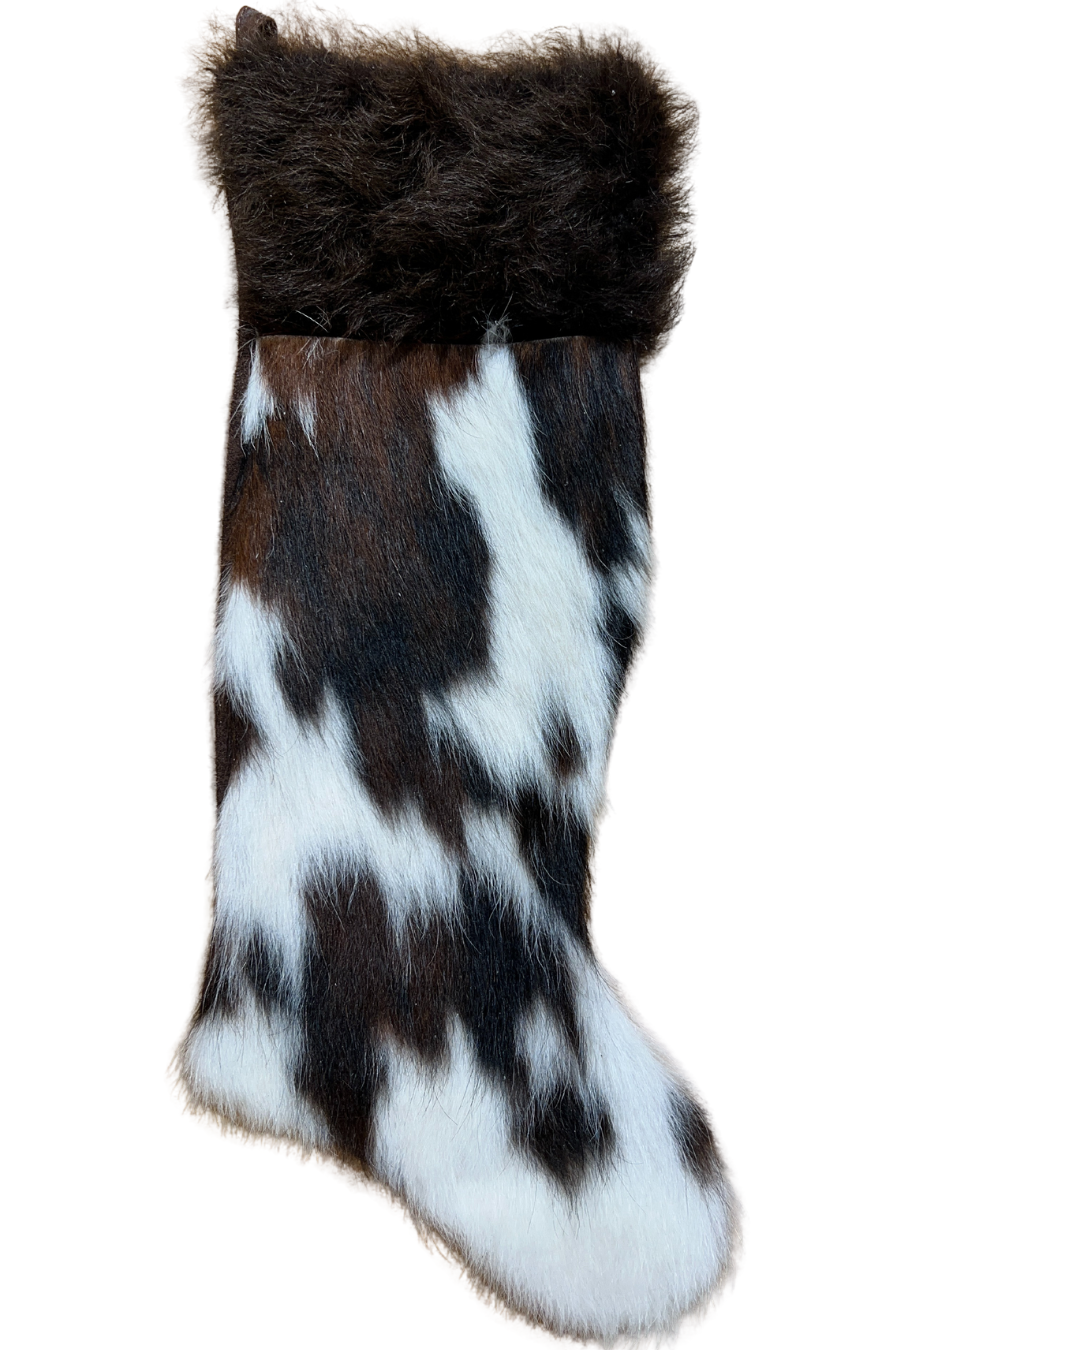 Cowhide Christmas Stocking - Tricolor Brown & White with Bison Hair - Large